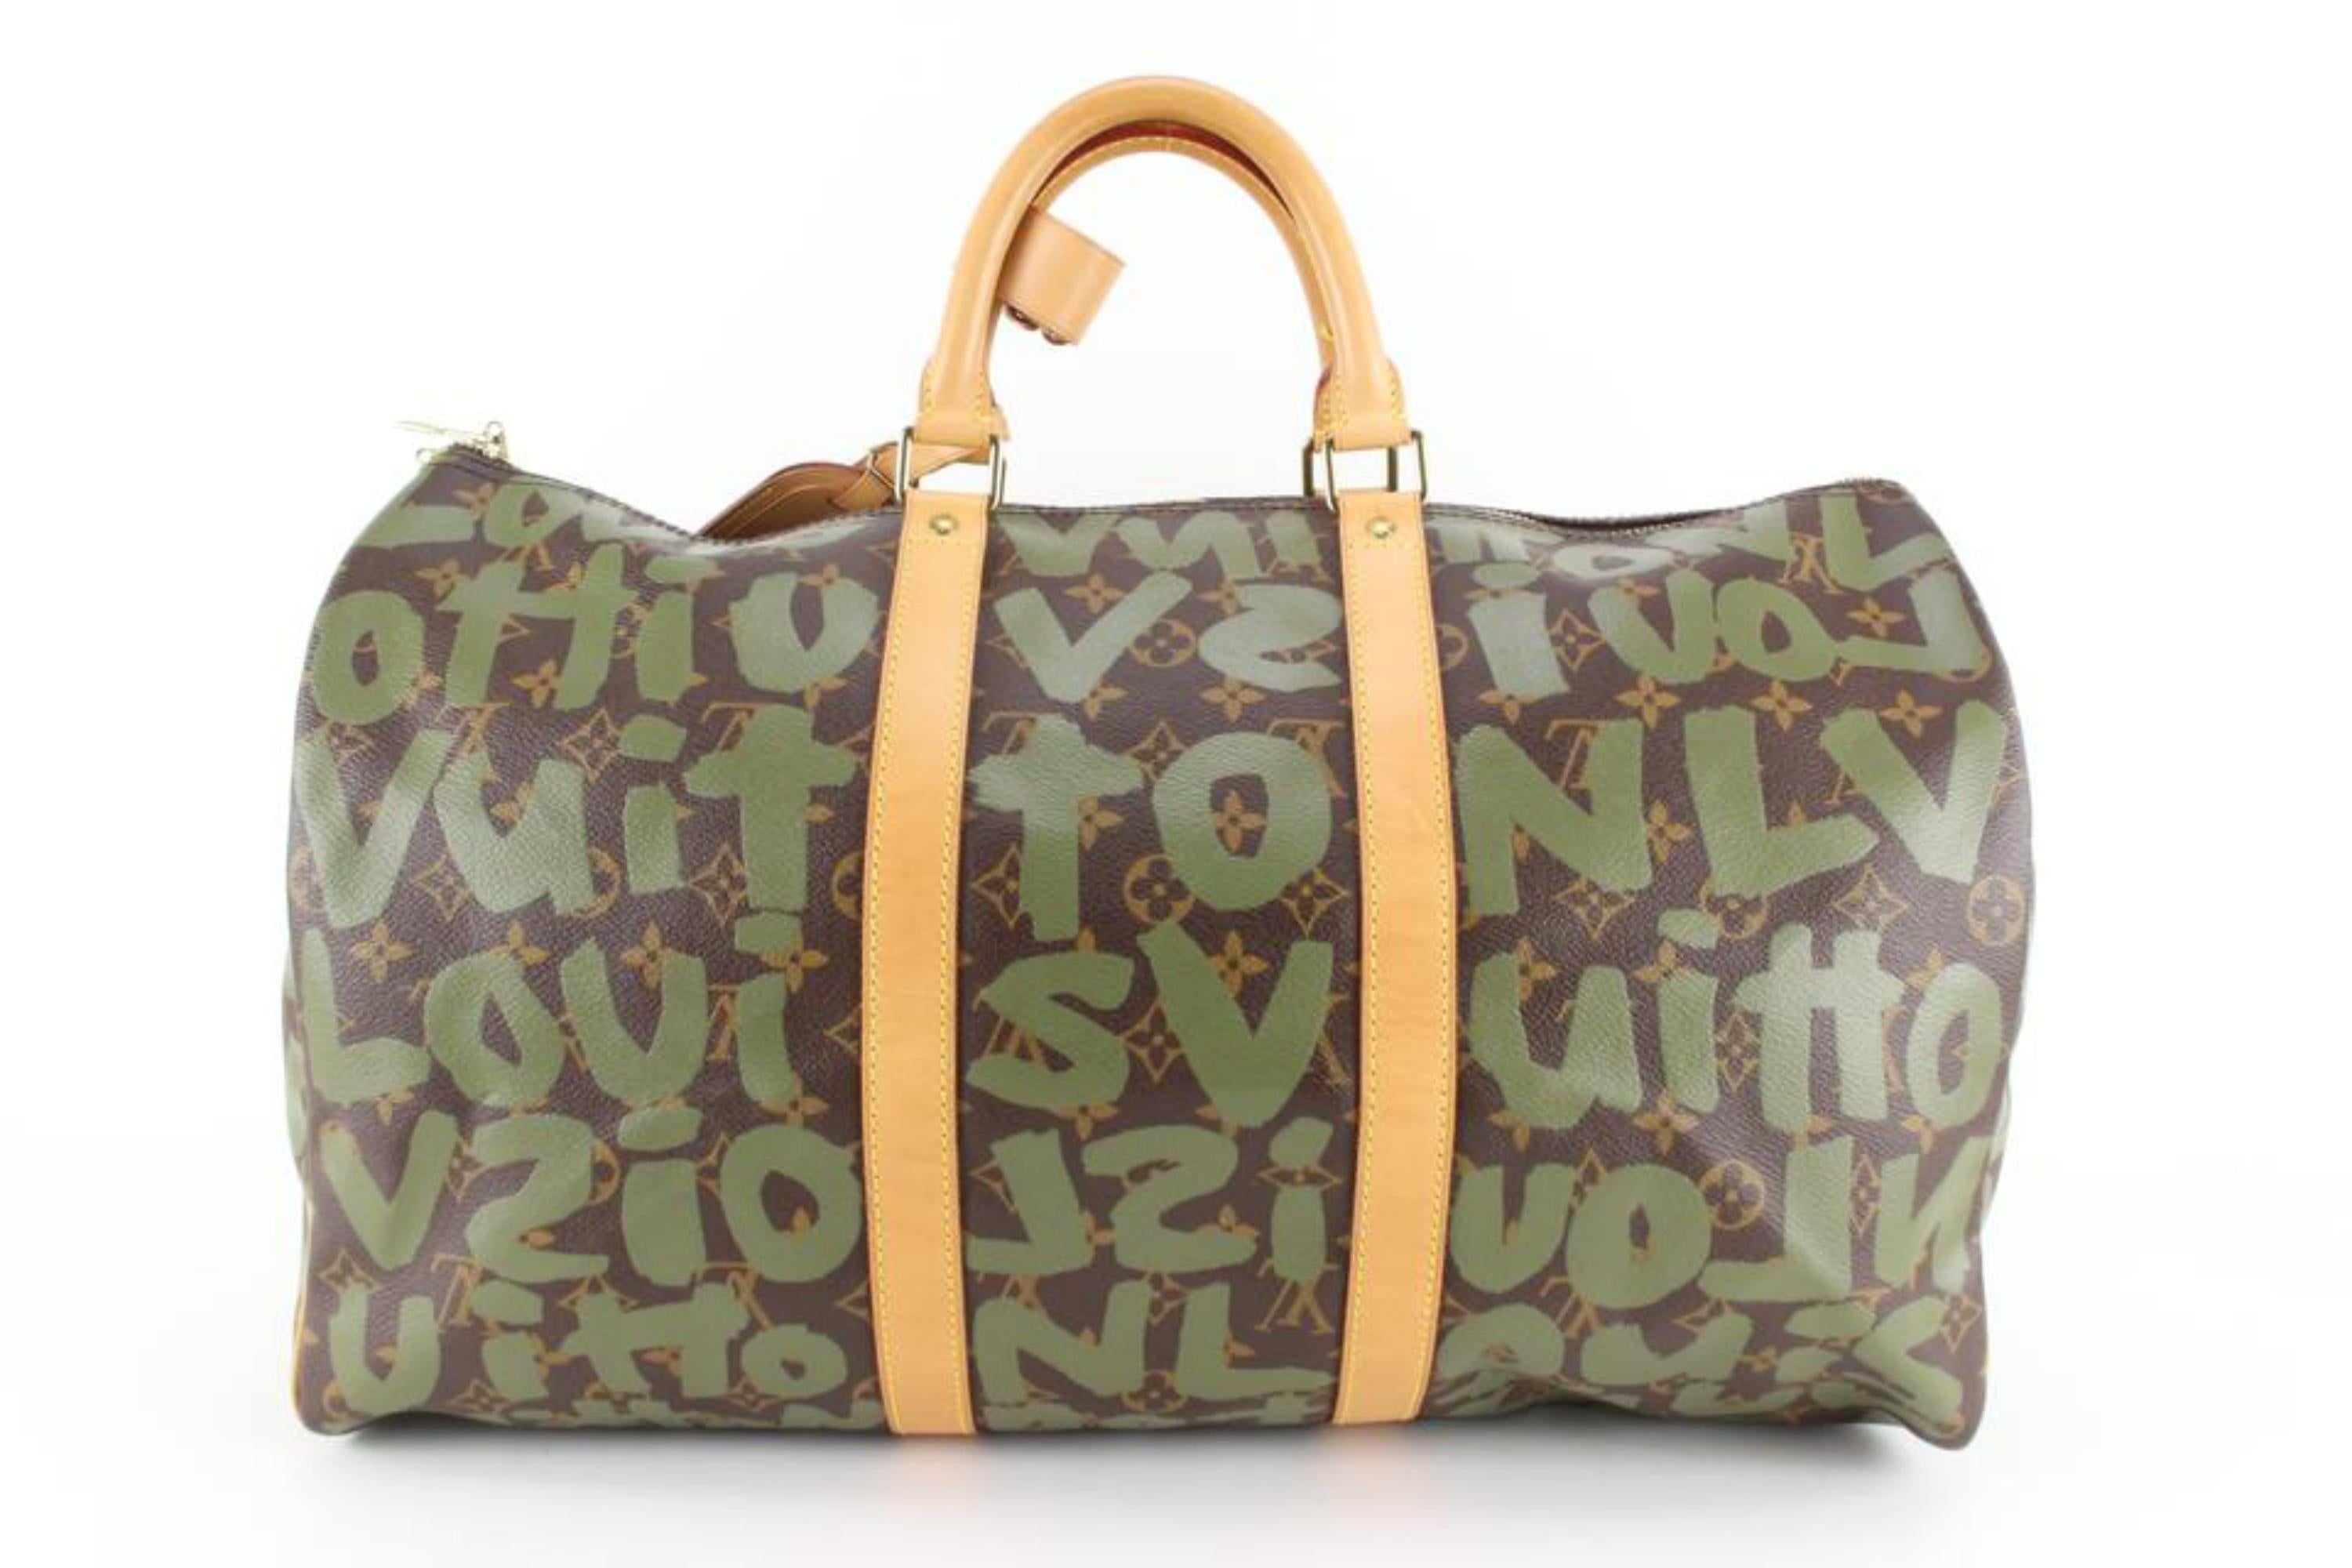 Louis Vuitton Stephen Sprouse Khaki Green Monogram Graffiti Keepall 50 64lz817s In Good Condition For Sale In Dix hills, NY